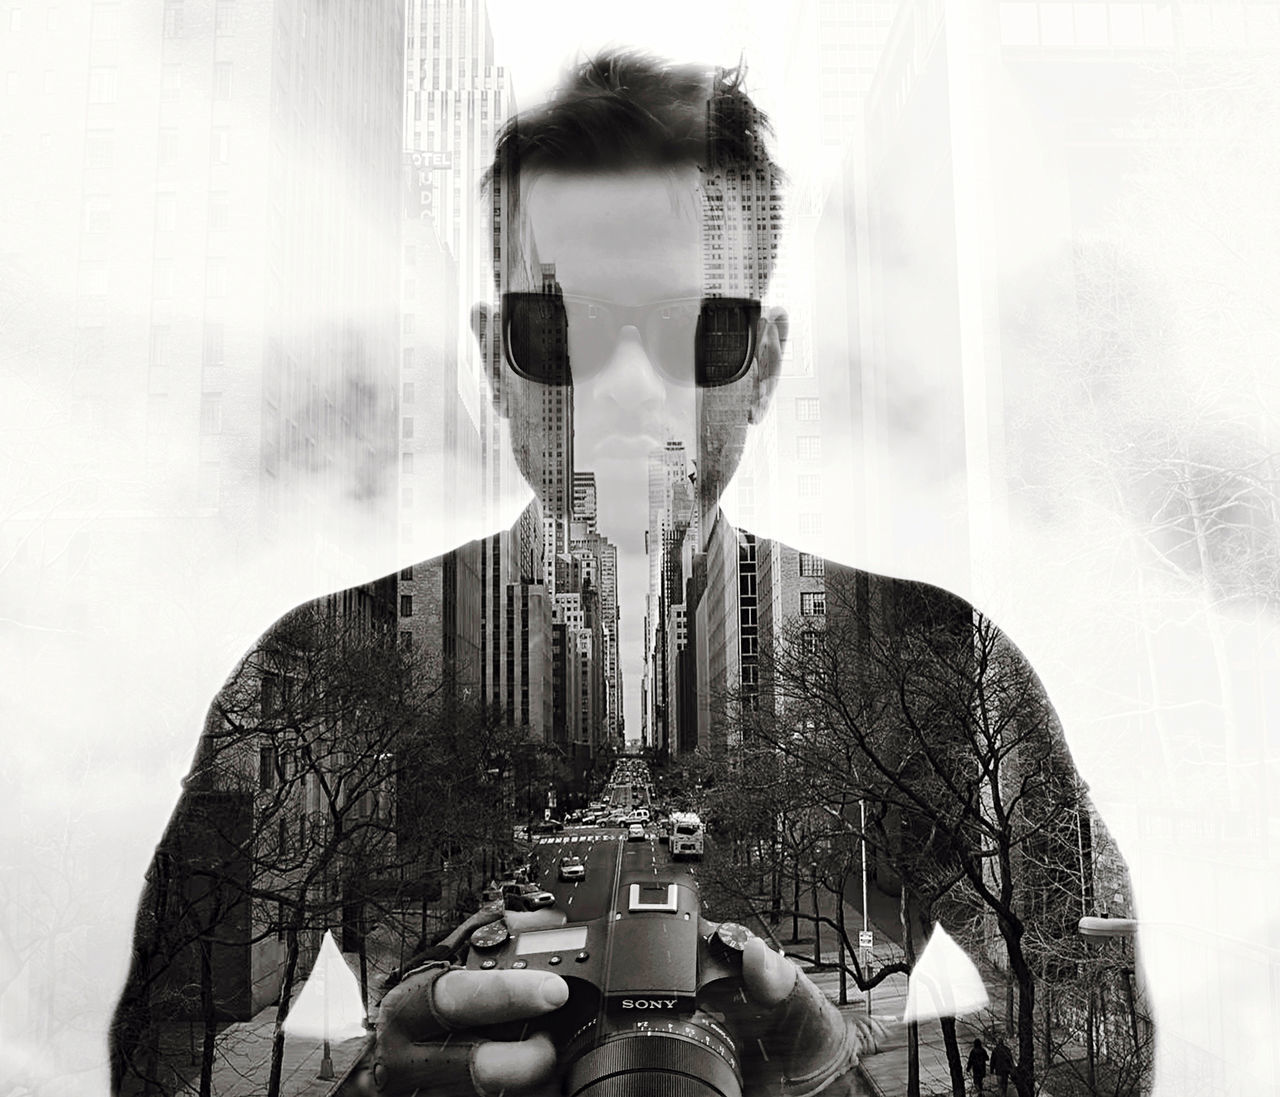 DIGITAL COMPOSITE IMAGE OF A MAN PHOTOGRAPHING